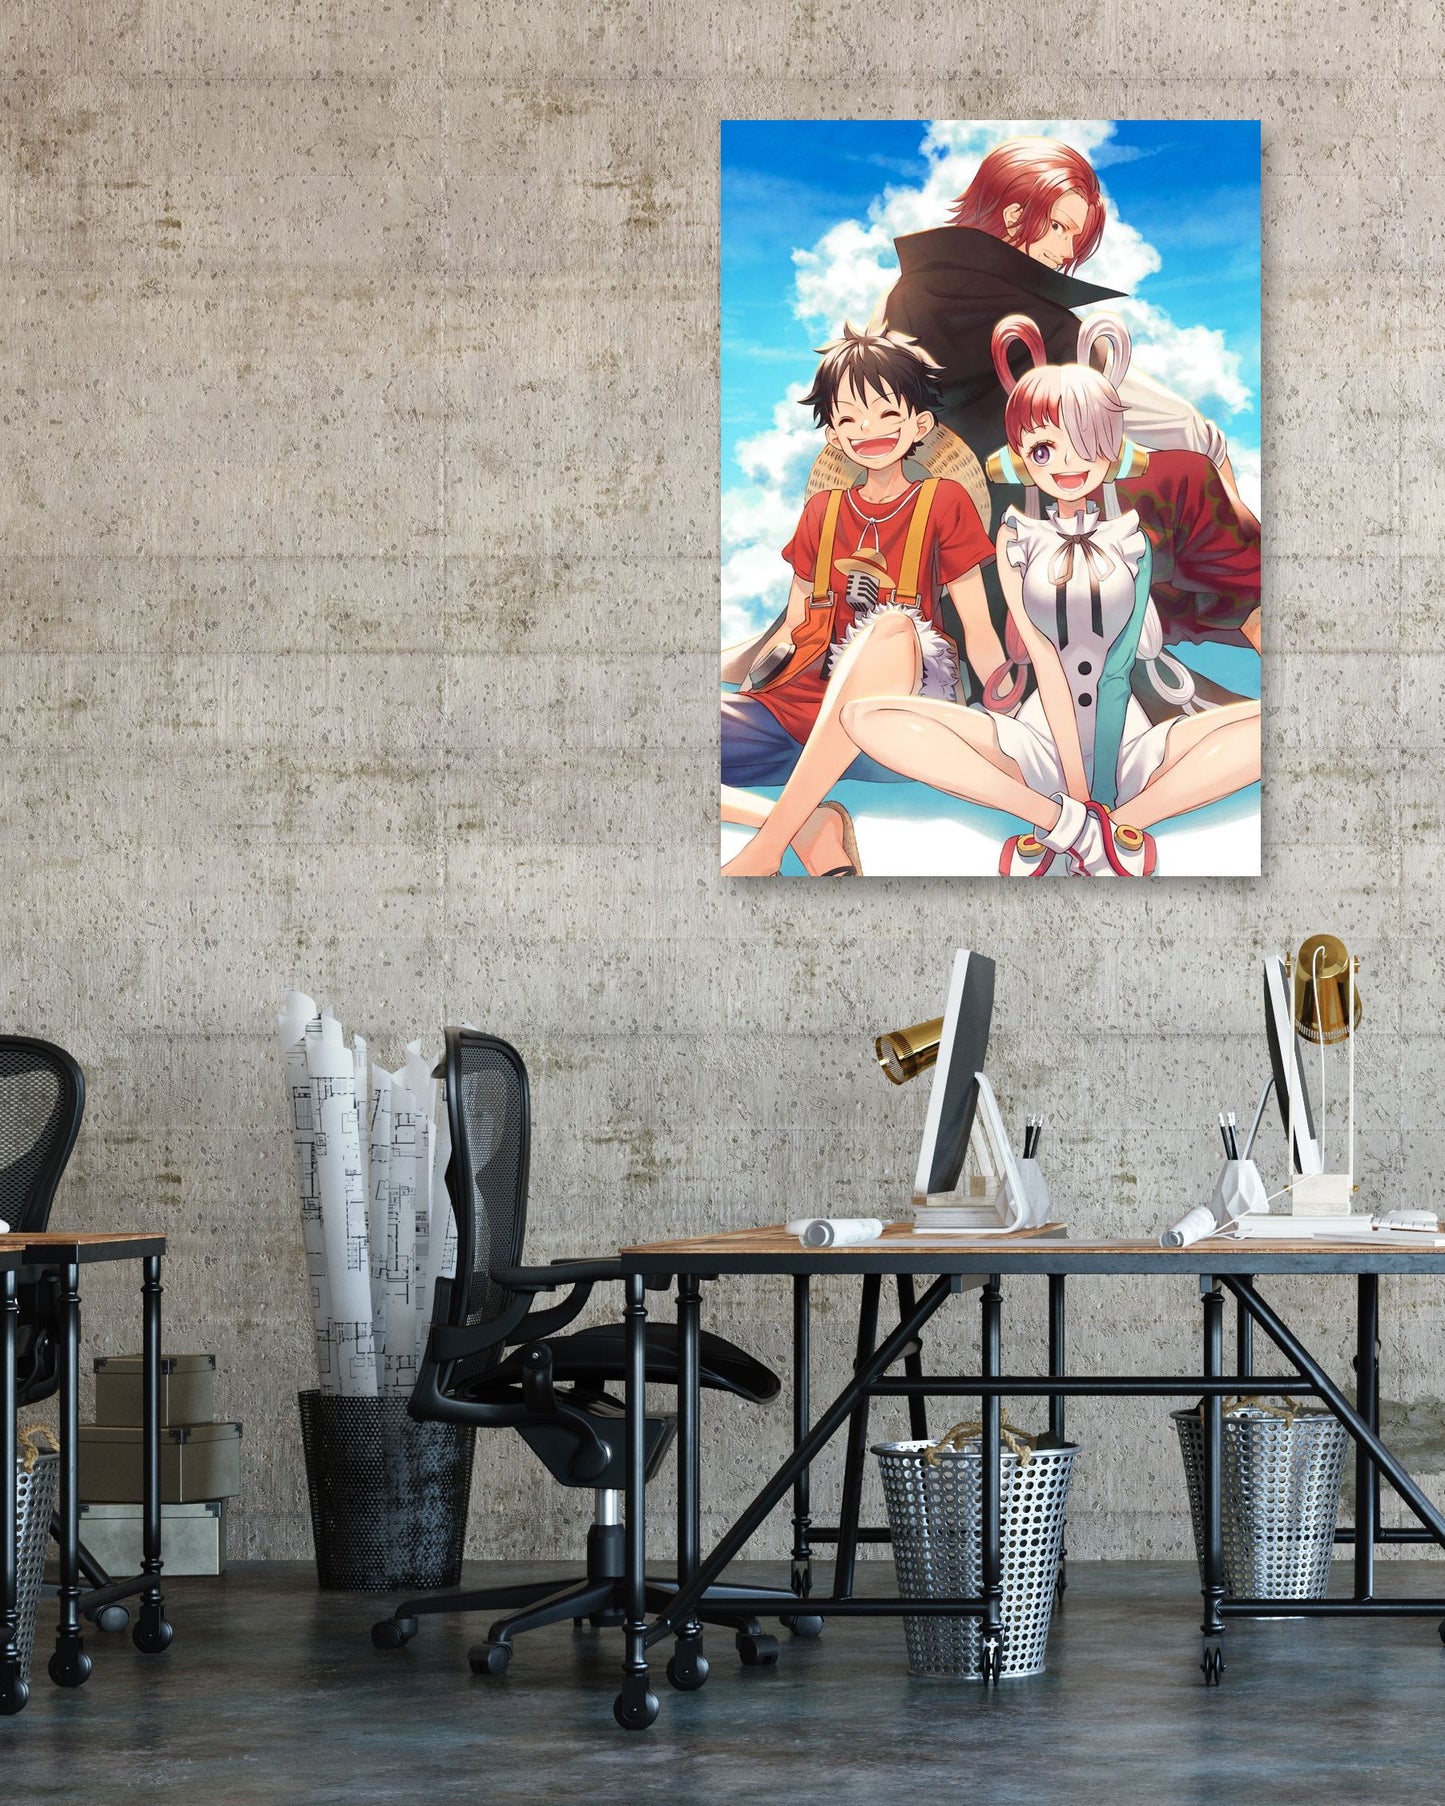 One piece 25 - @UPGallery